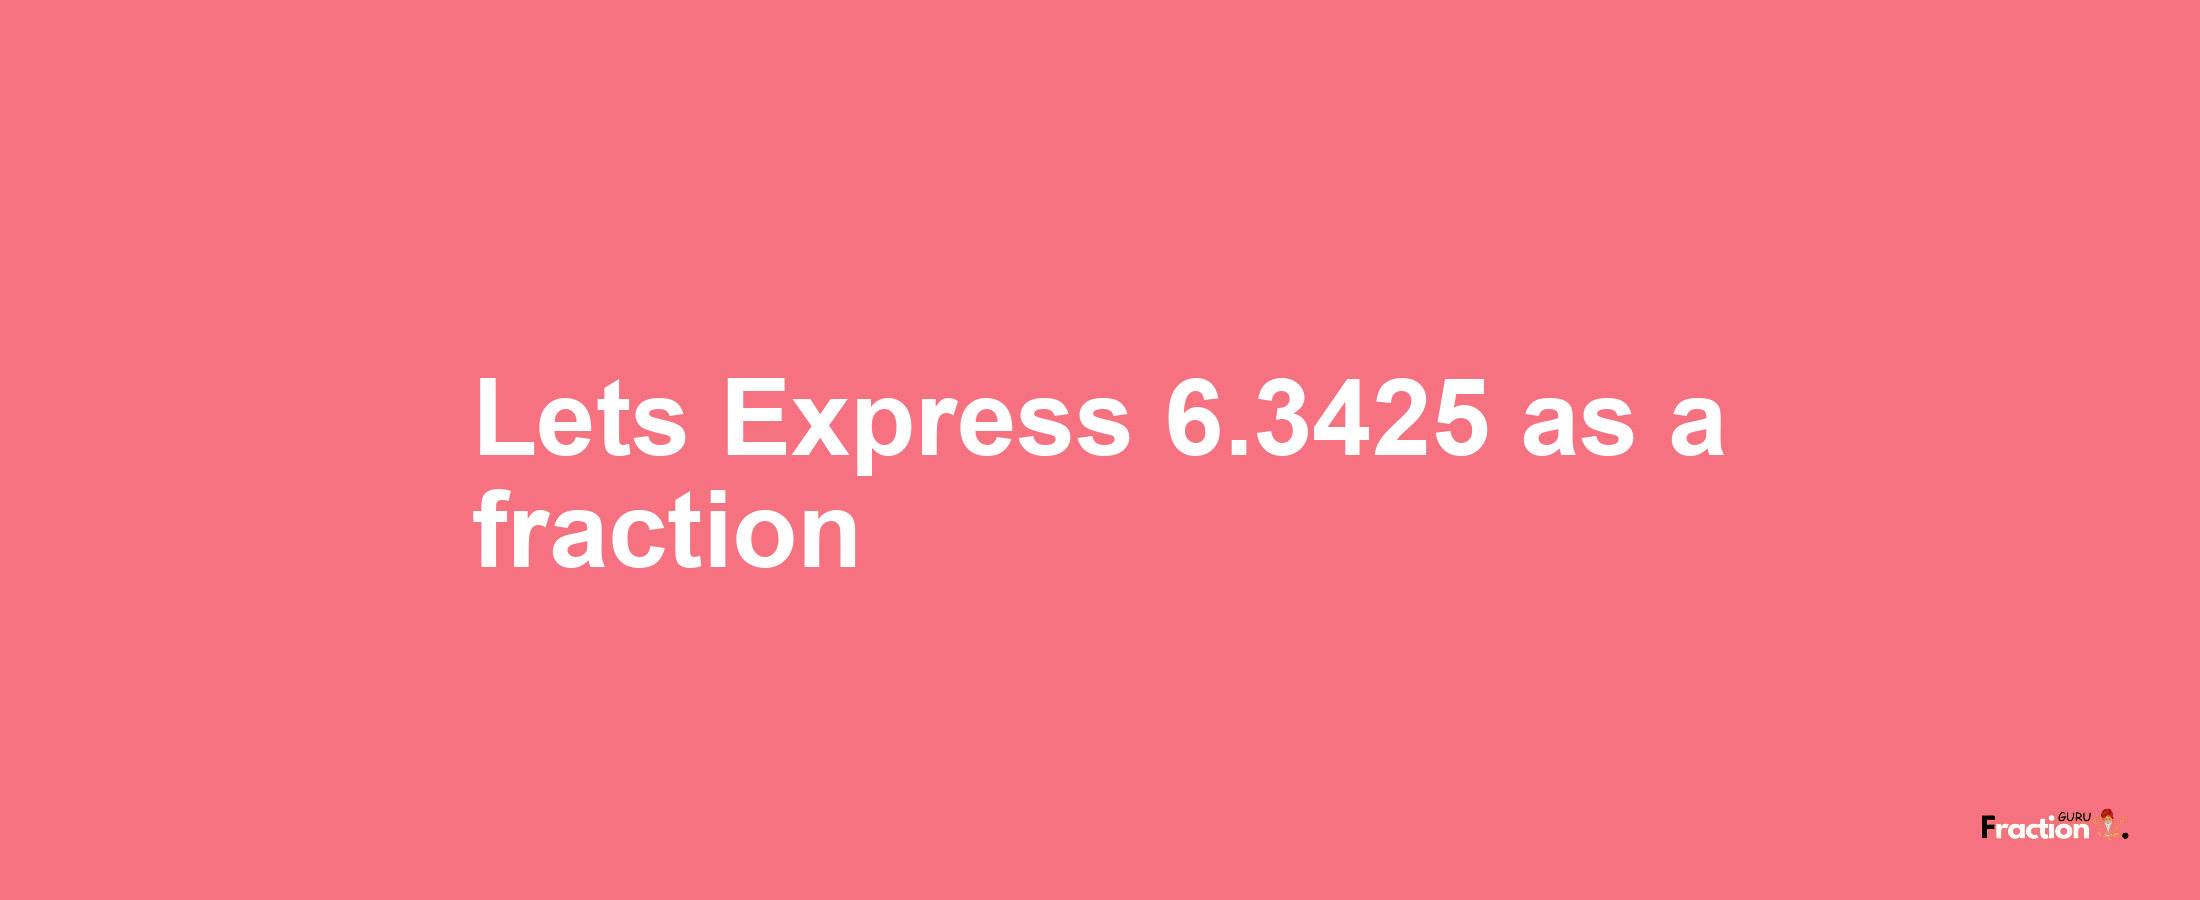 Lets Express 6.3425 as afraction